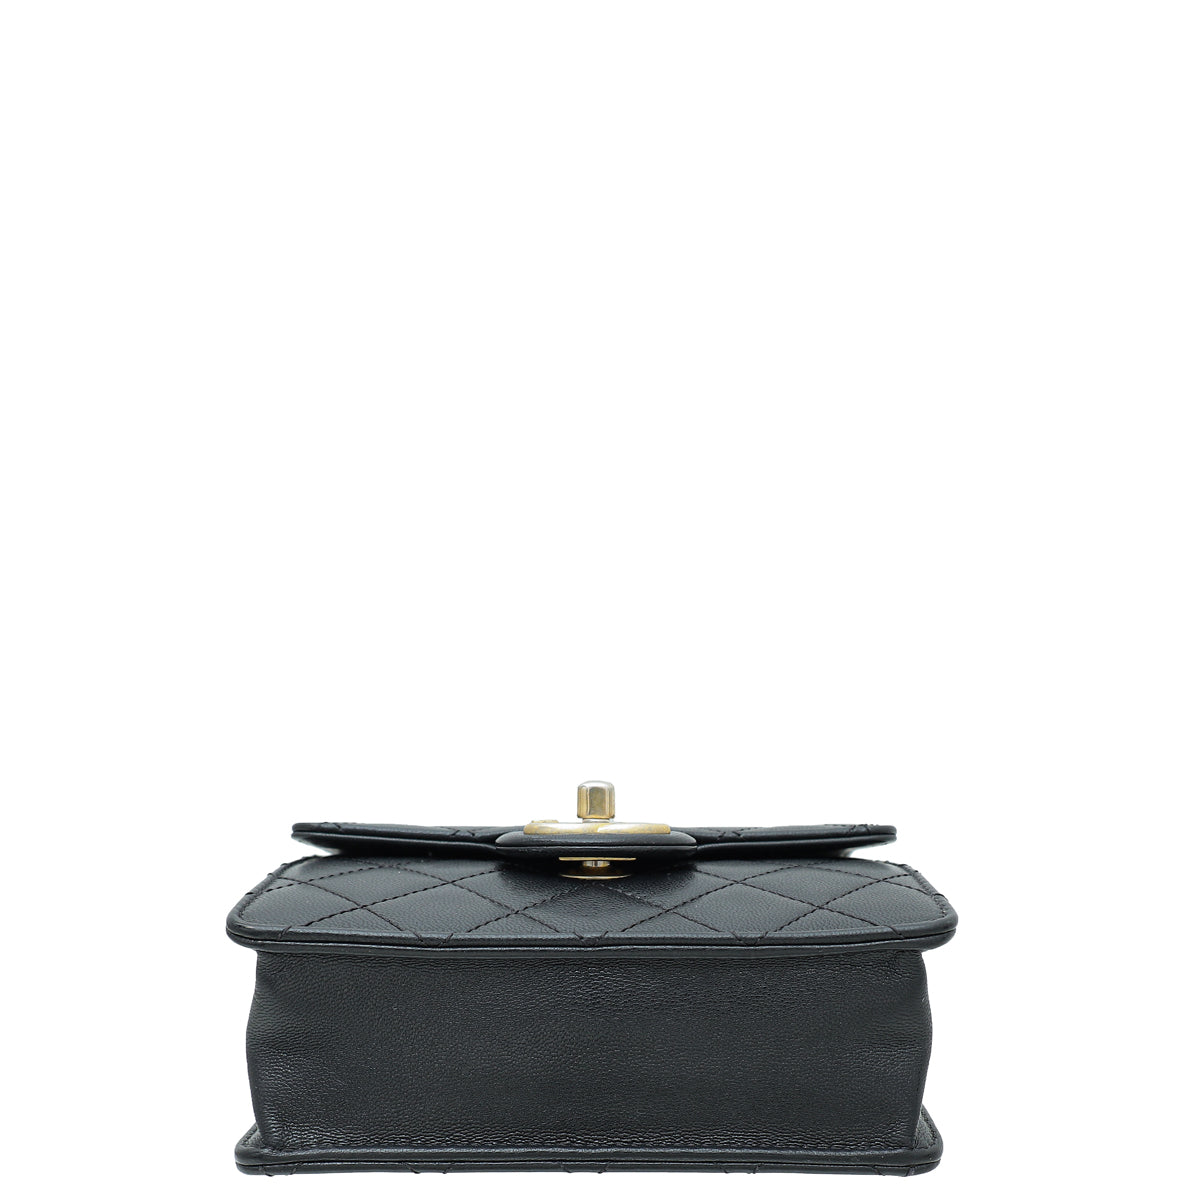 Chanel Black Chic Pearls Flap Small Bag